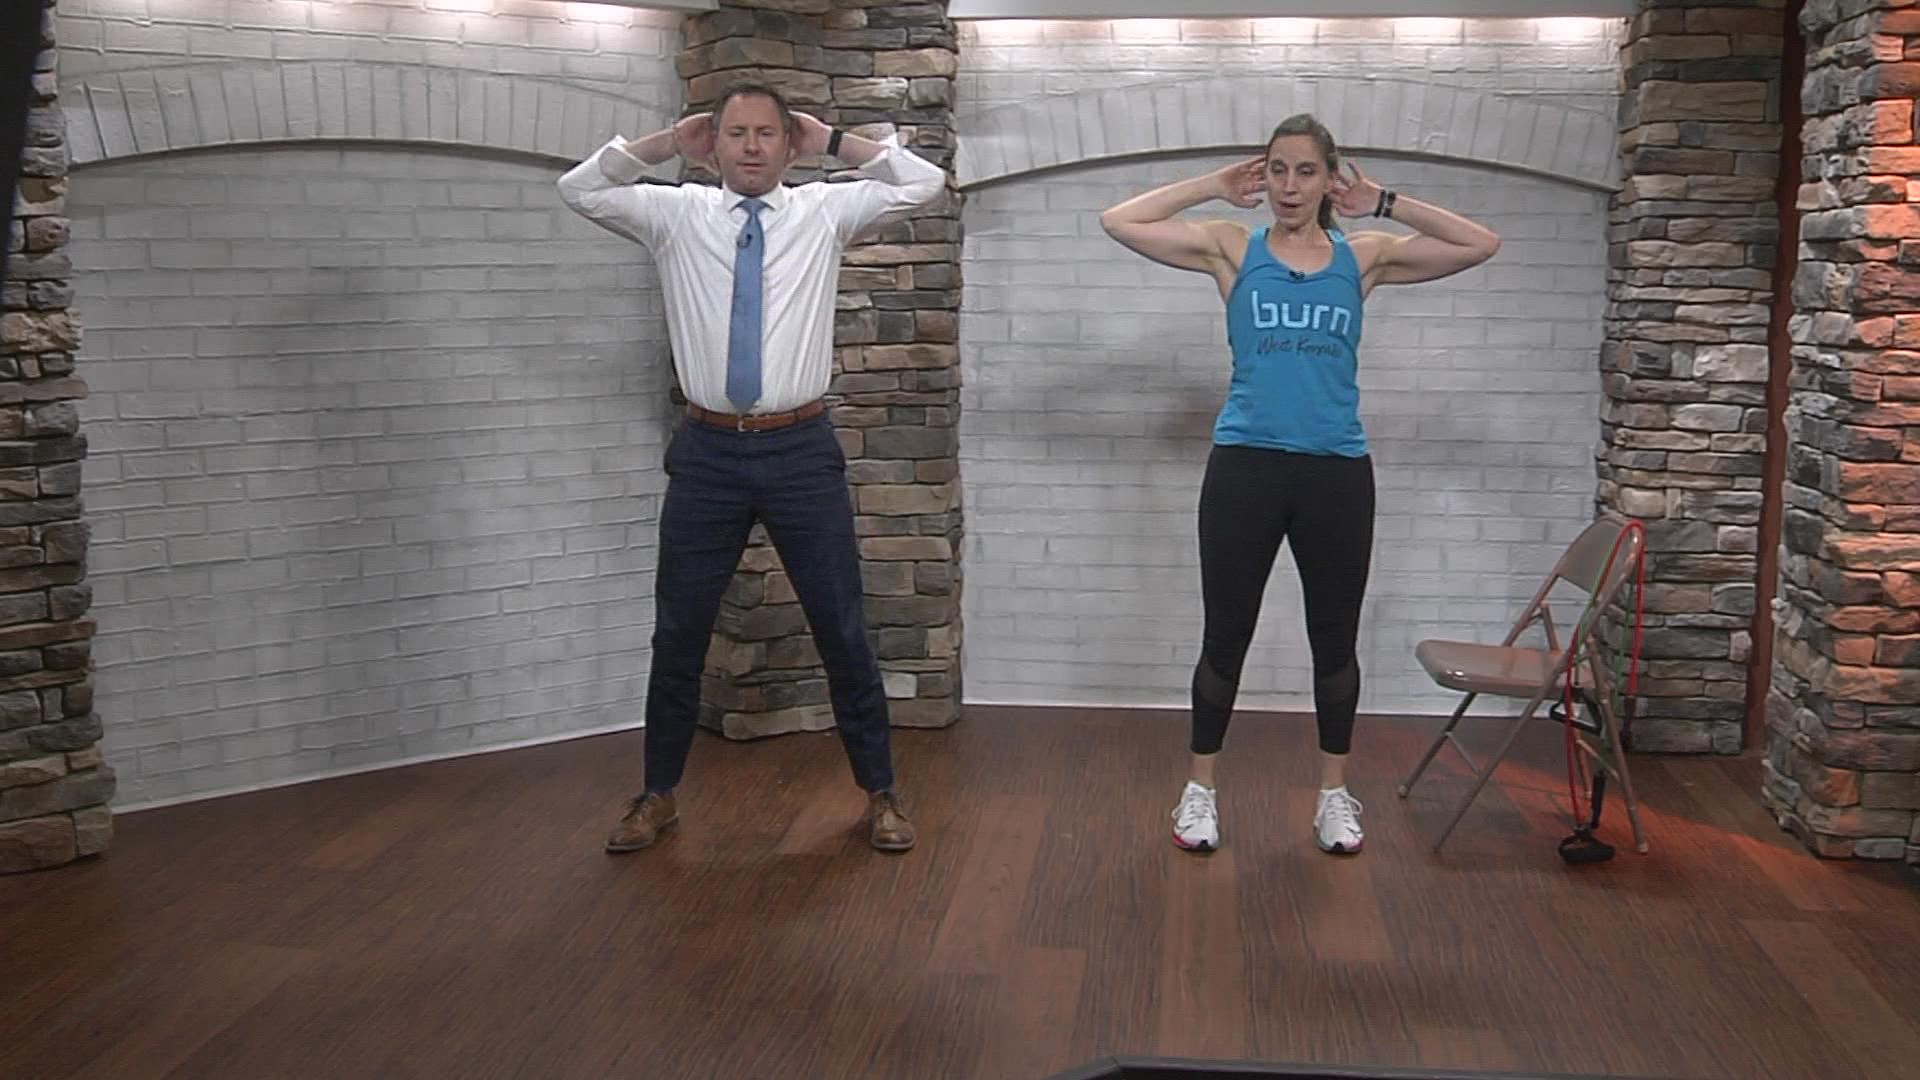 Carissa Mahoney from Burn Boot Camp in Farragut shares some easy no-equipment exercises.